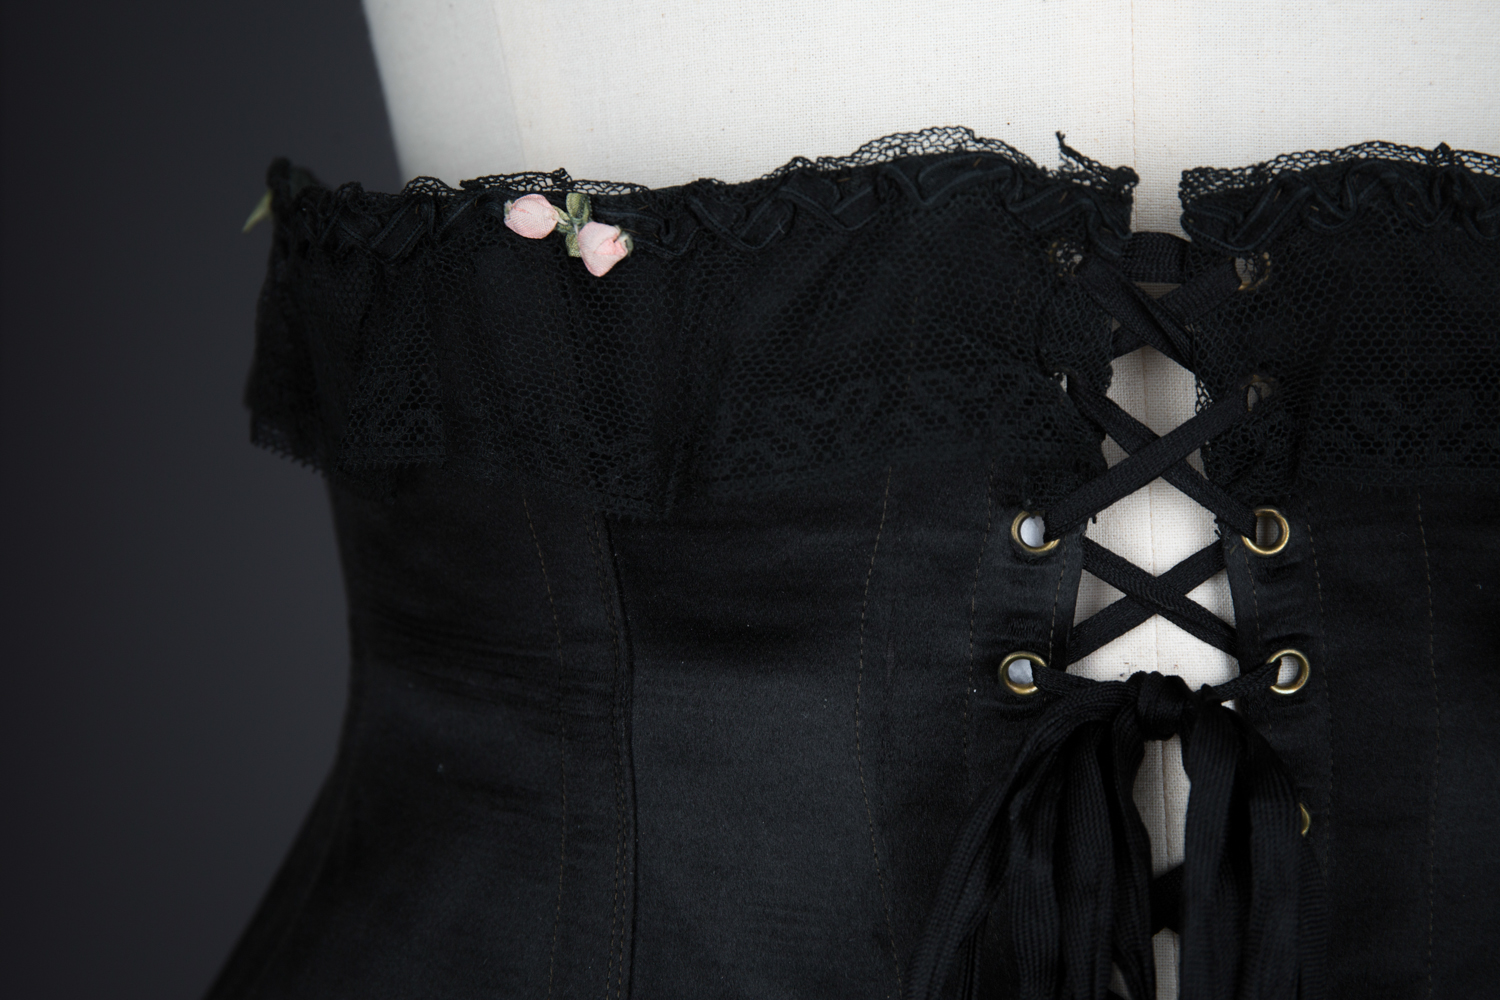 Black Silk Underbust Corset With Suspenders & Ribbonwork by Corsets "Guy" , c. 1920s, France. The Underpinnings Museum. Photography by Tigz Rice.